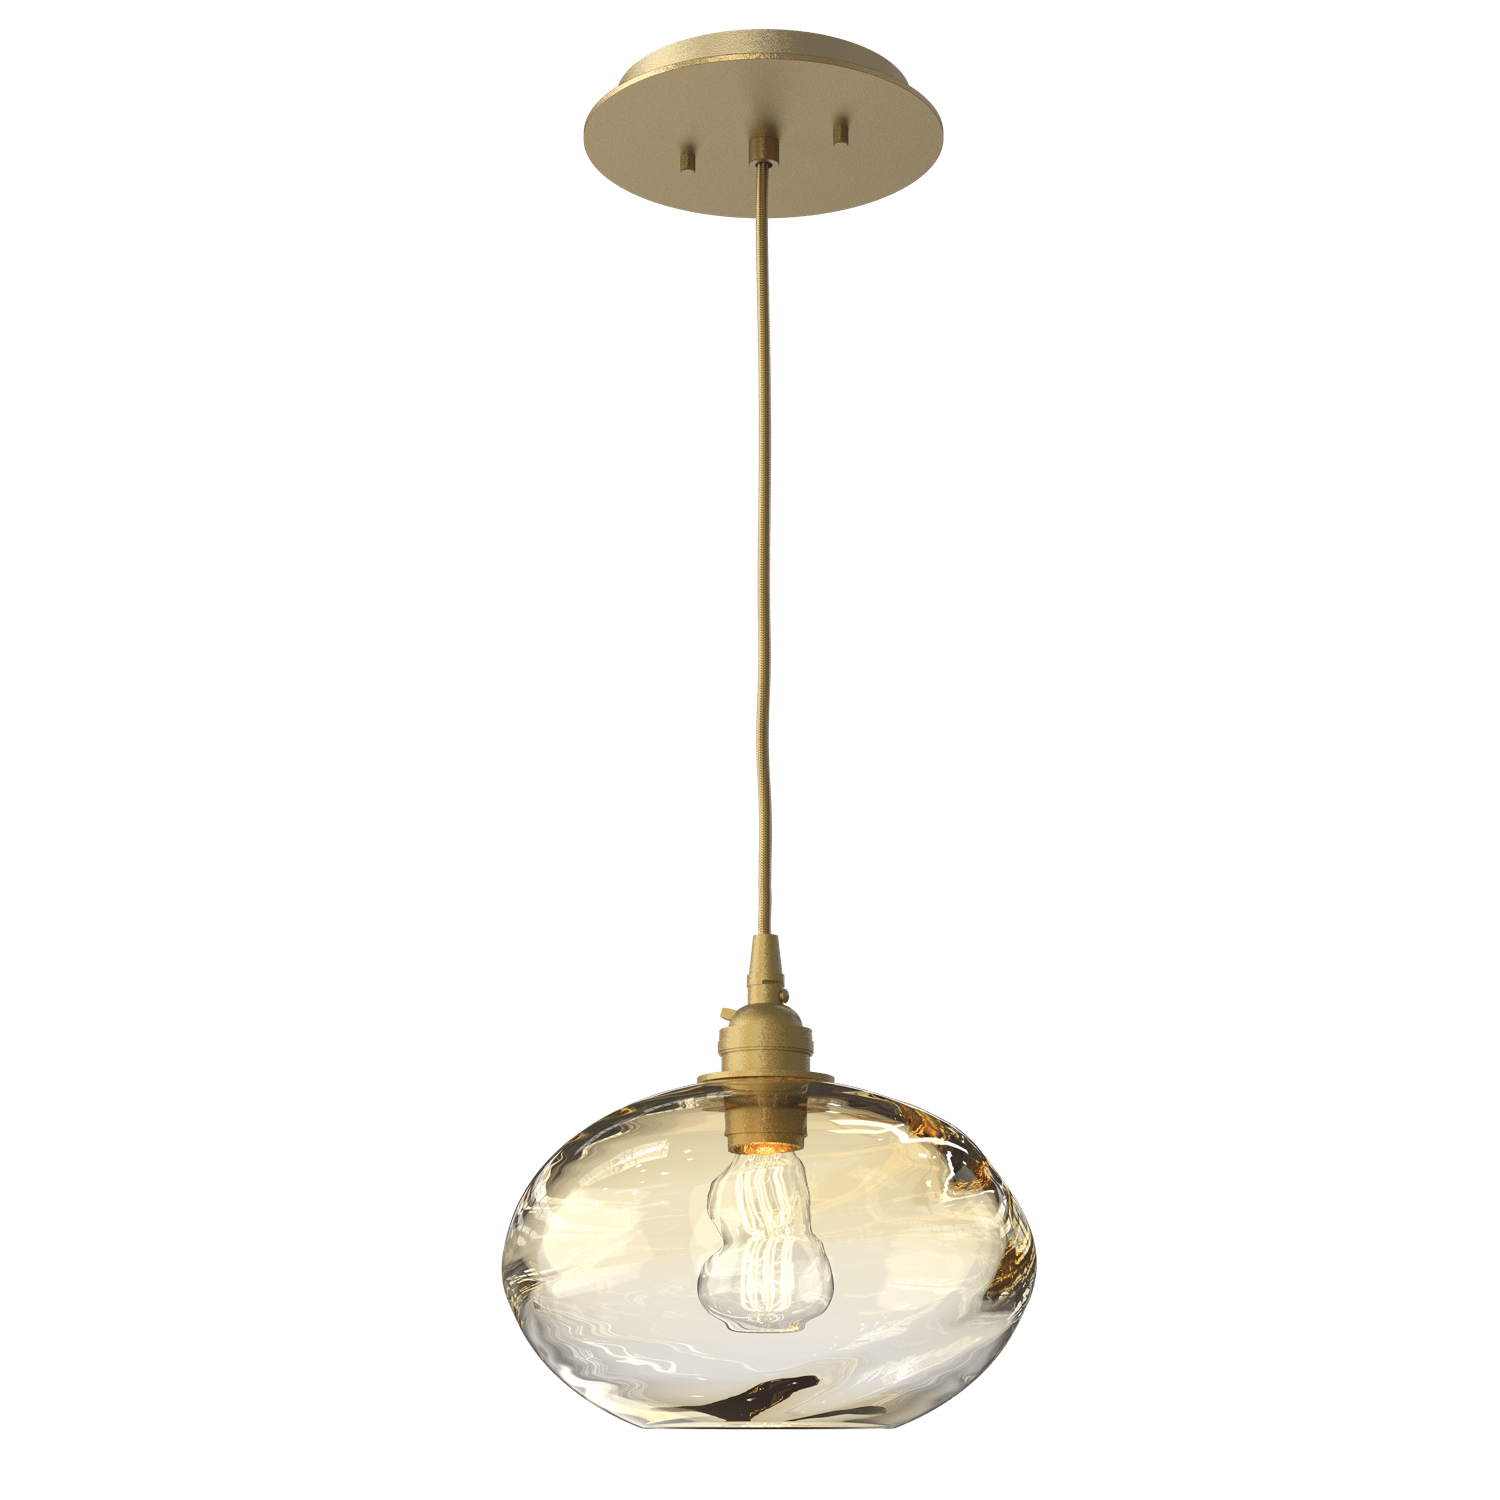 LAB0036-01-GB-OA-Hammerton-Studio-Optic-Blown-Glass-Coppa-pendant-light-with-gilded-brass-finish-and-optic-amber-blown-glass-shades-and-incandescent-lamping